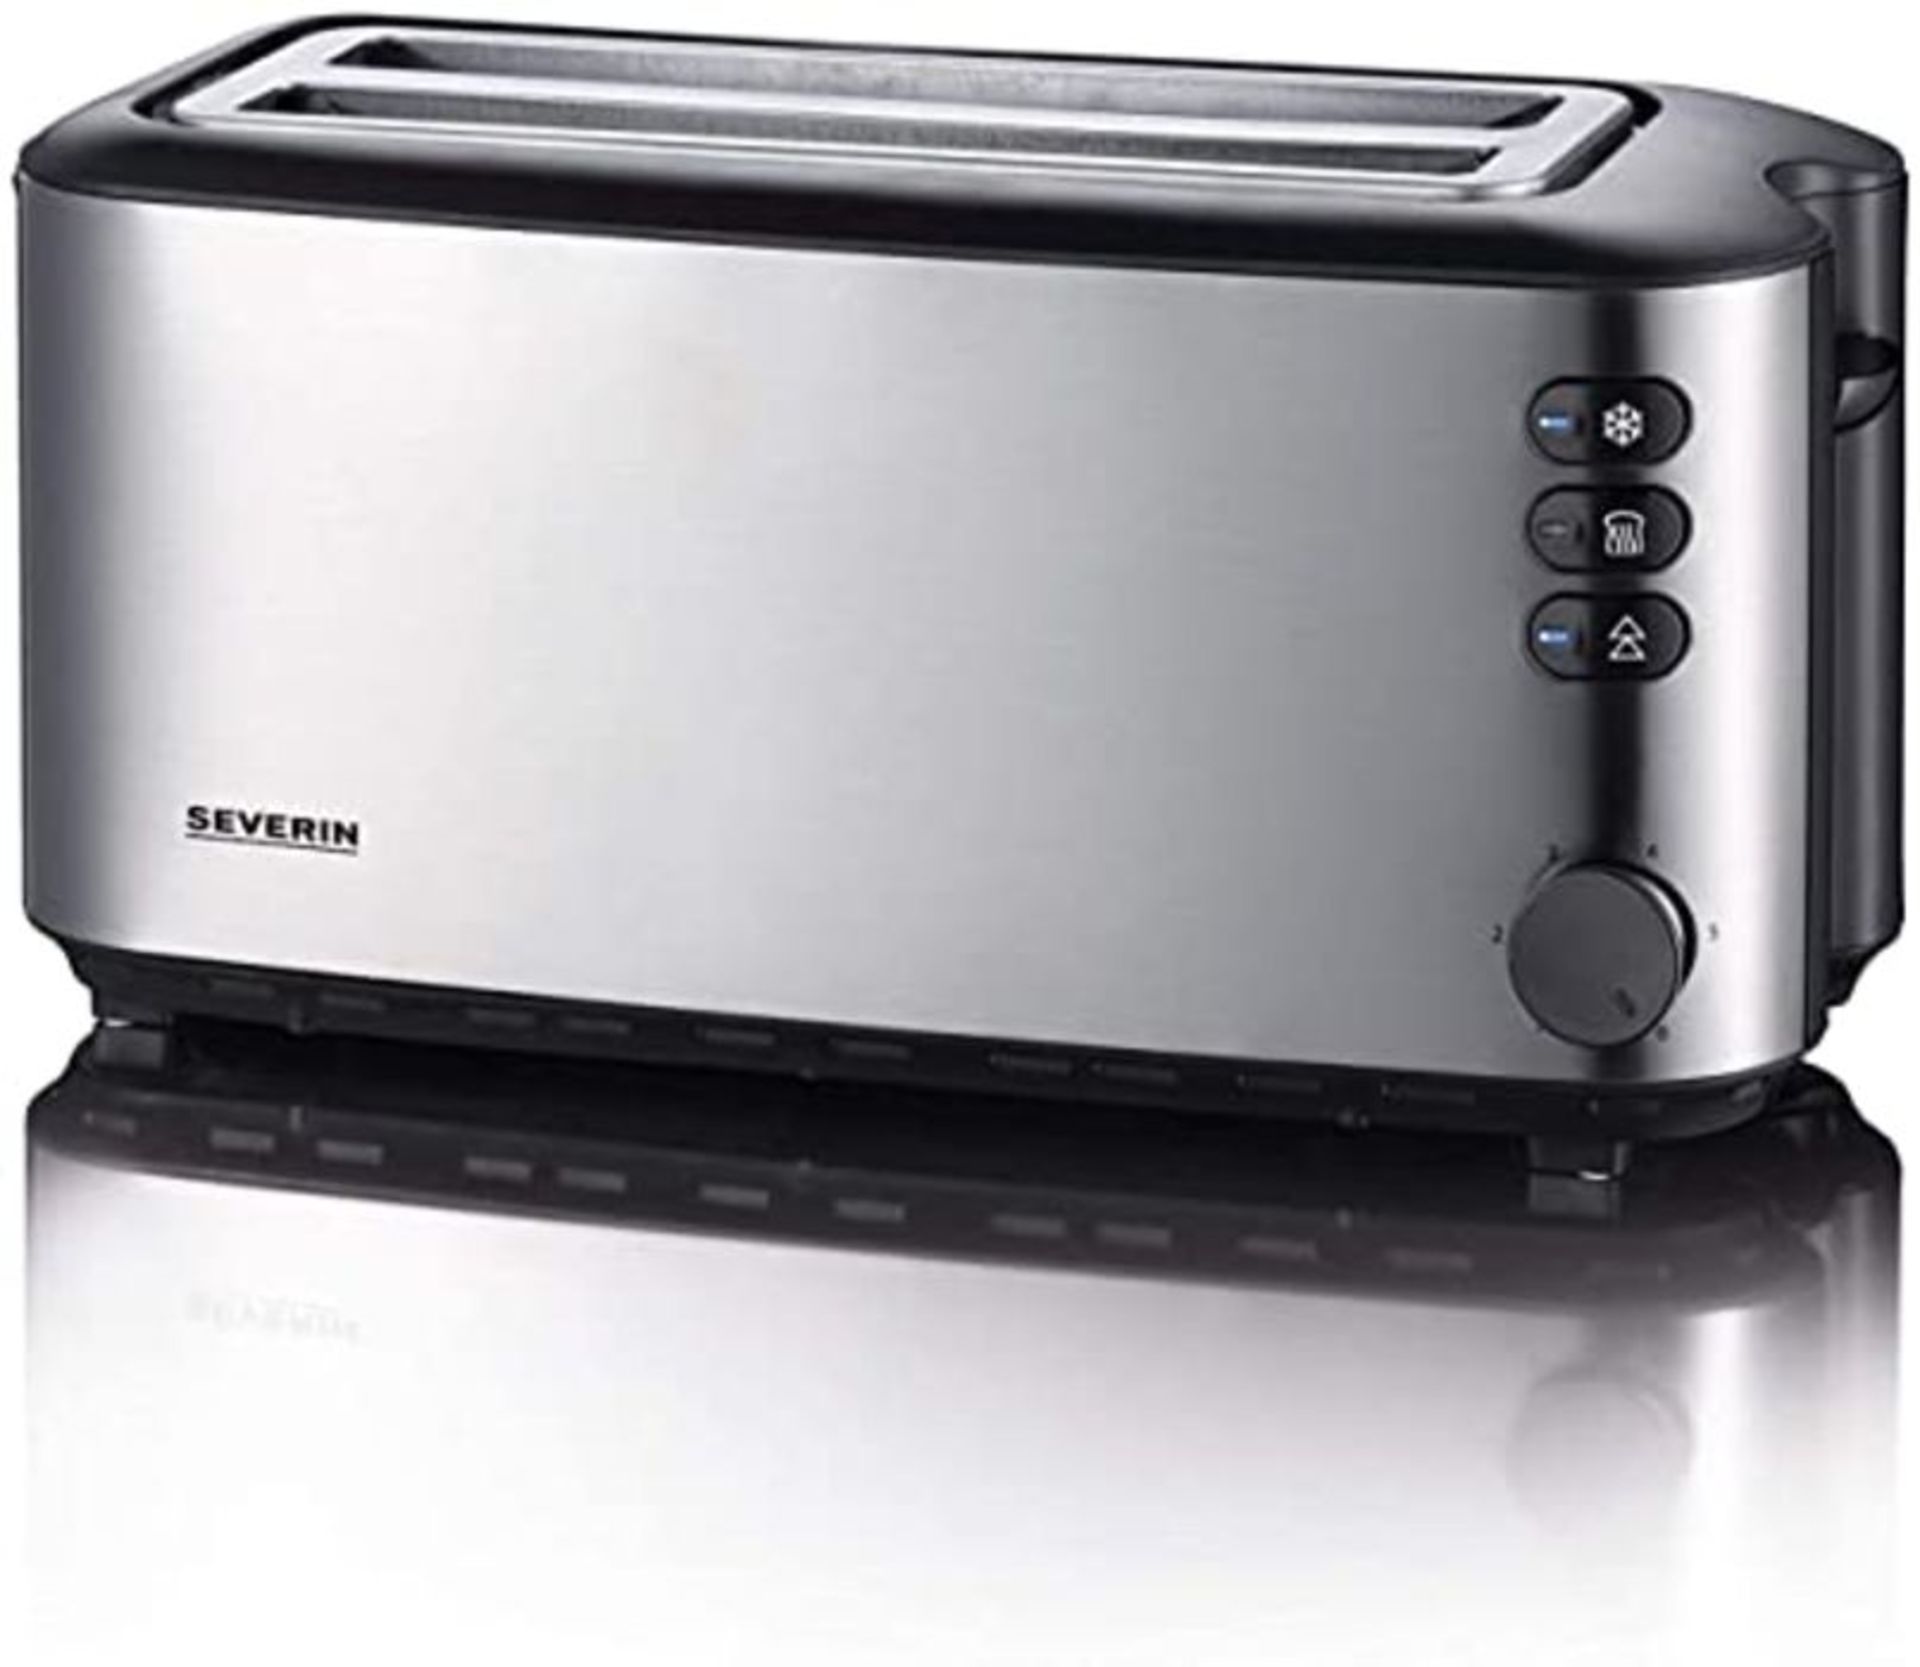 Severin 2509 Automatic 4-Slice Long Slot Toaster, 1400 W, Stainless Steel-Black Chambe